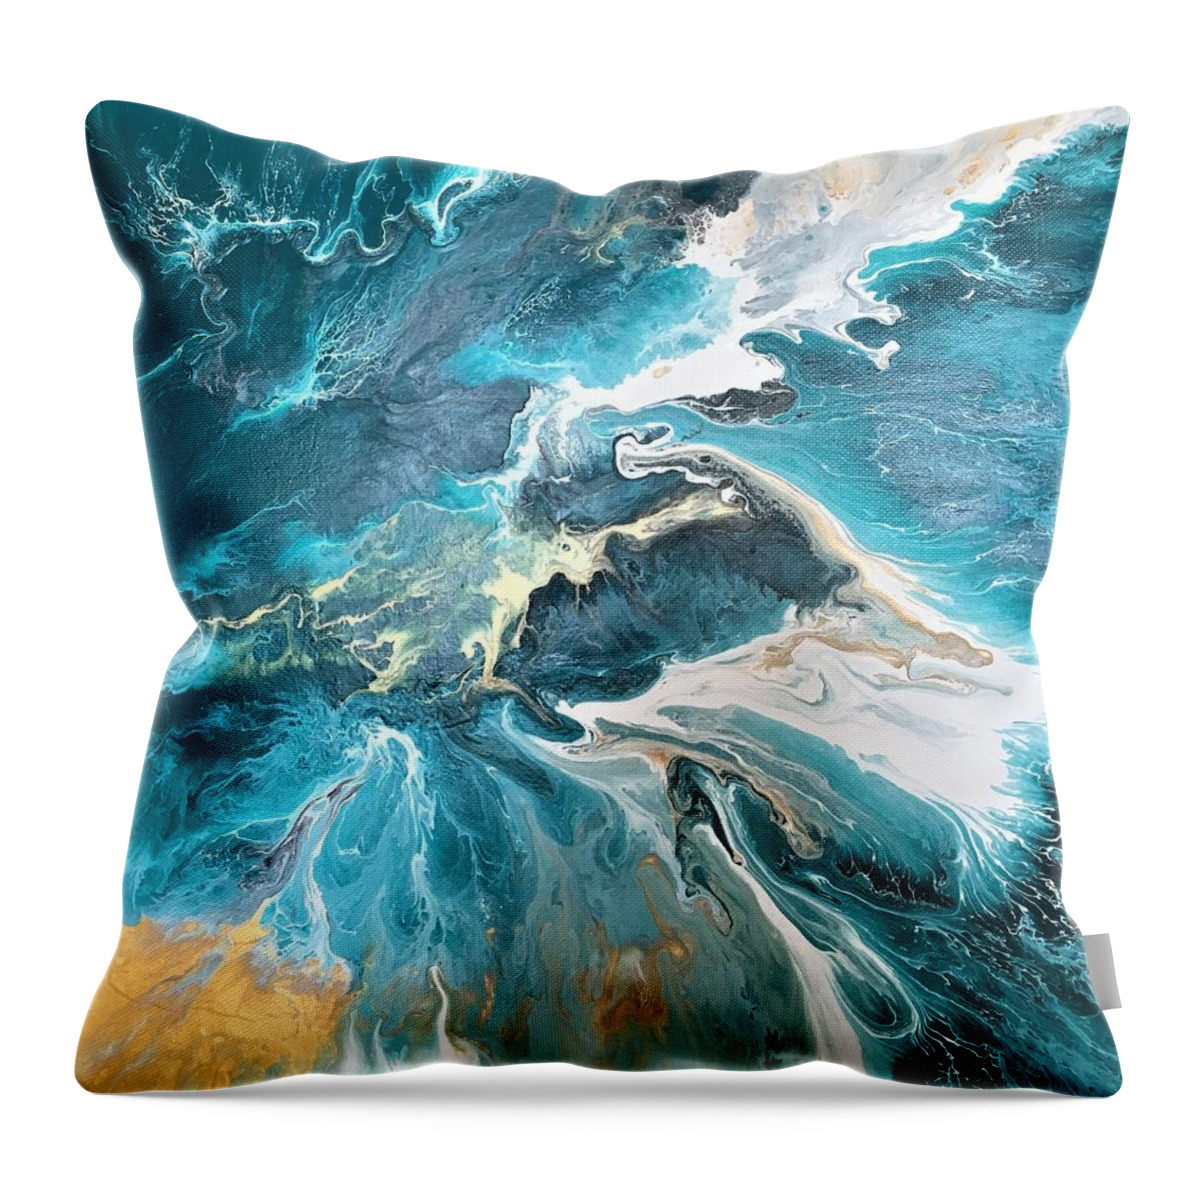 Abstract Art Throw Pillow featuring the painting Archipelago by Soraya Silvestri